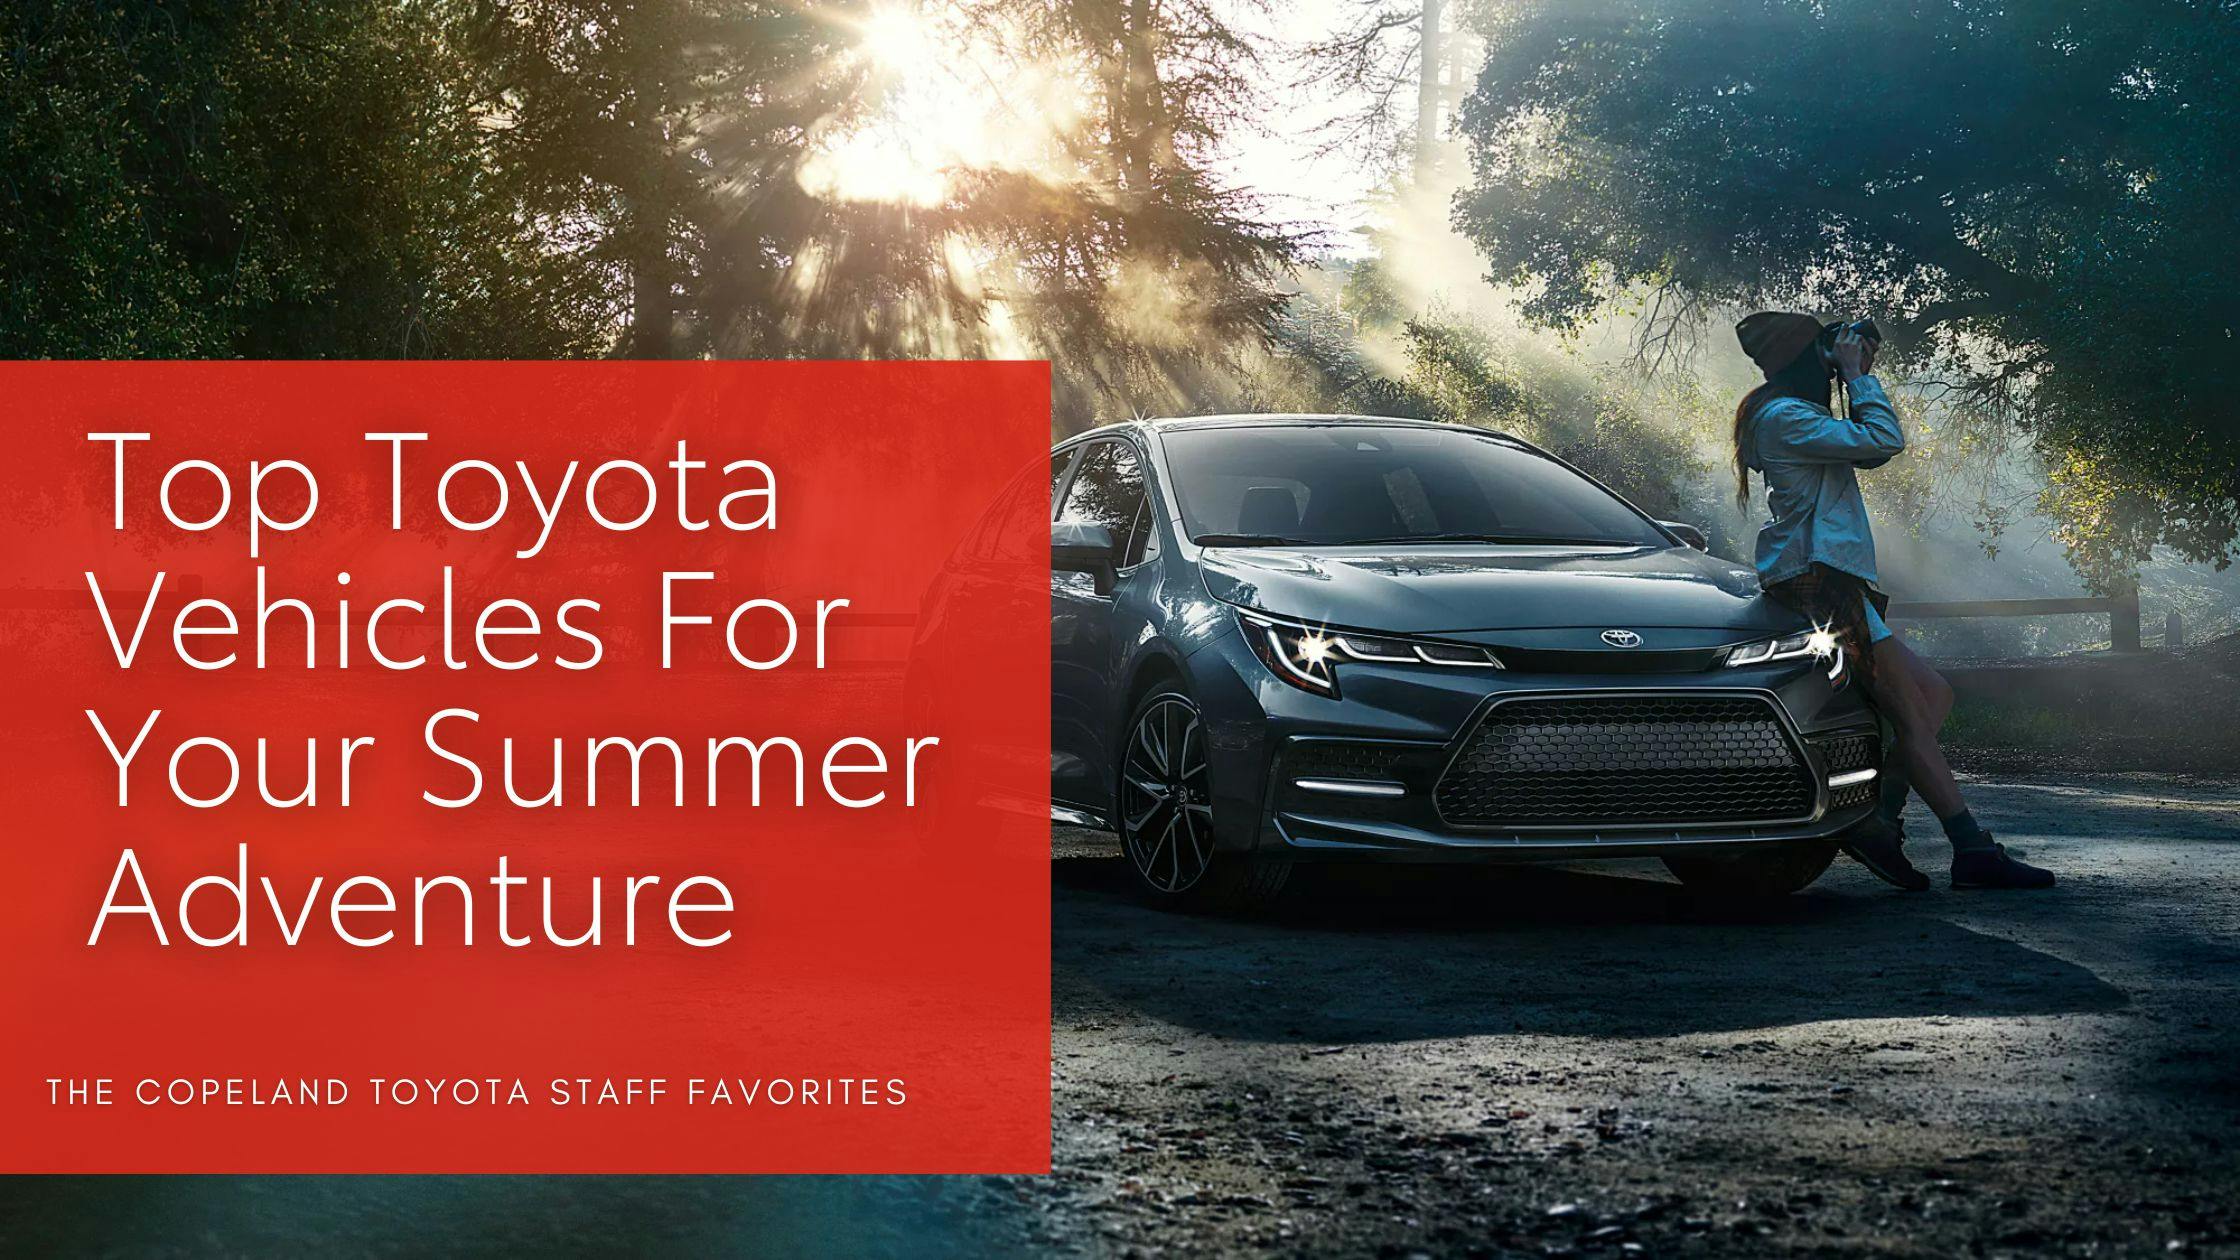 Top Toyota Vehicles For Your Summer Adventure